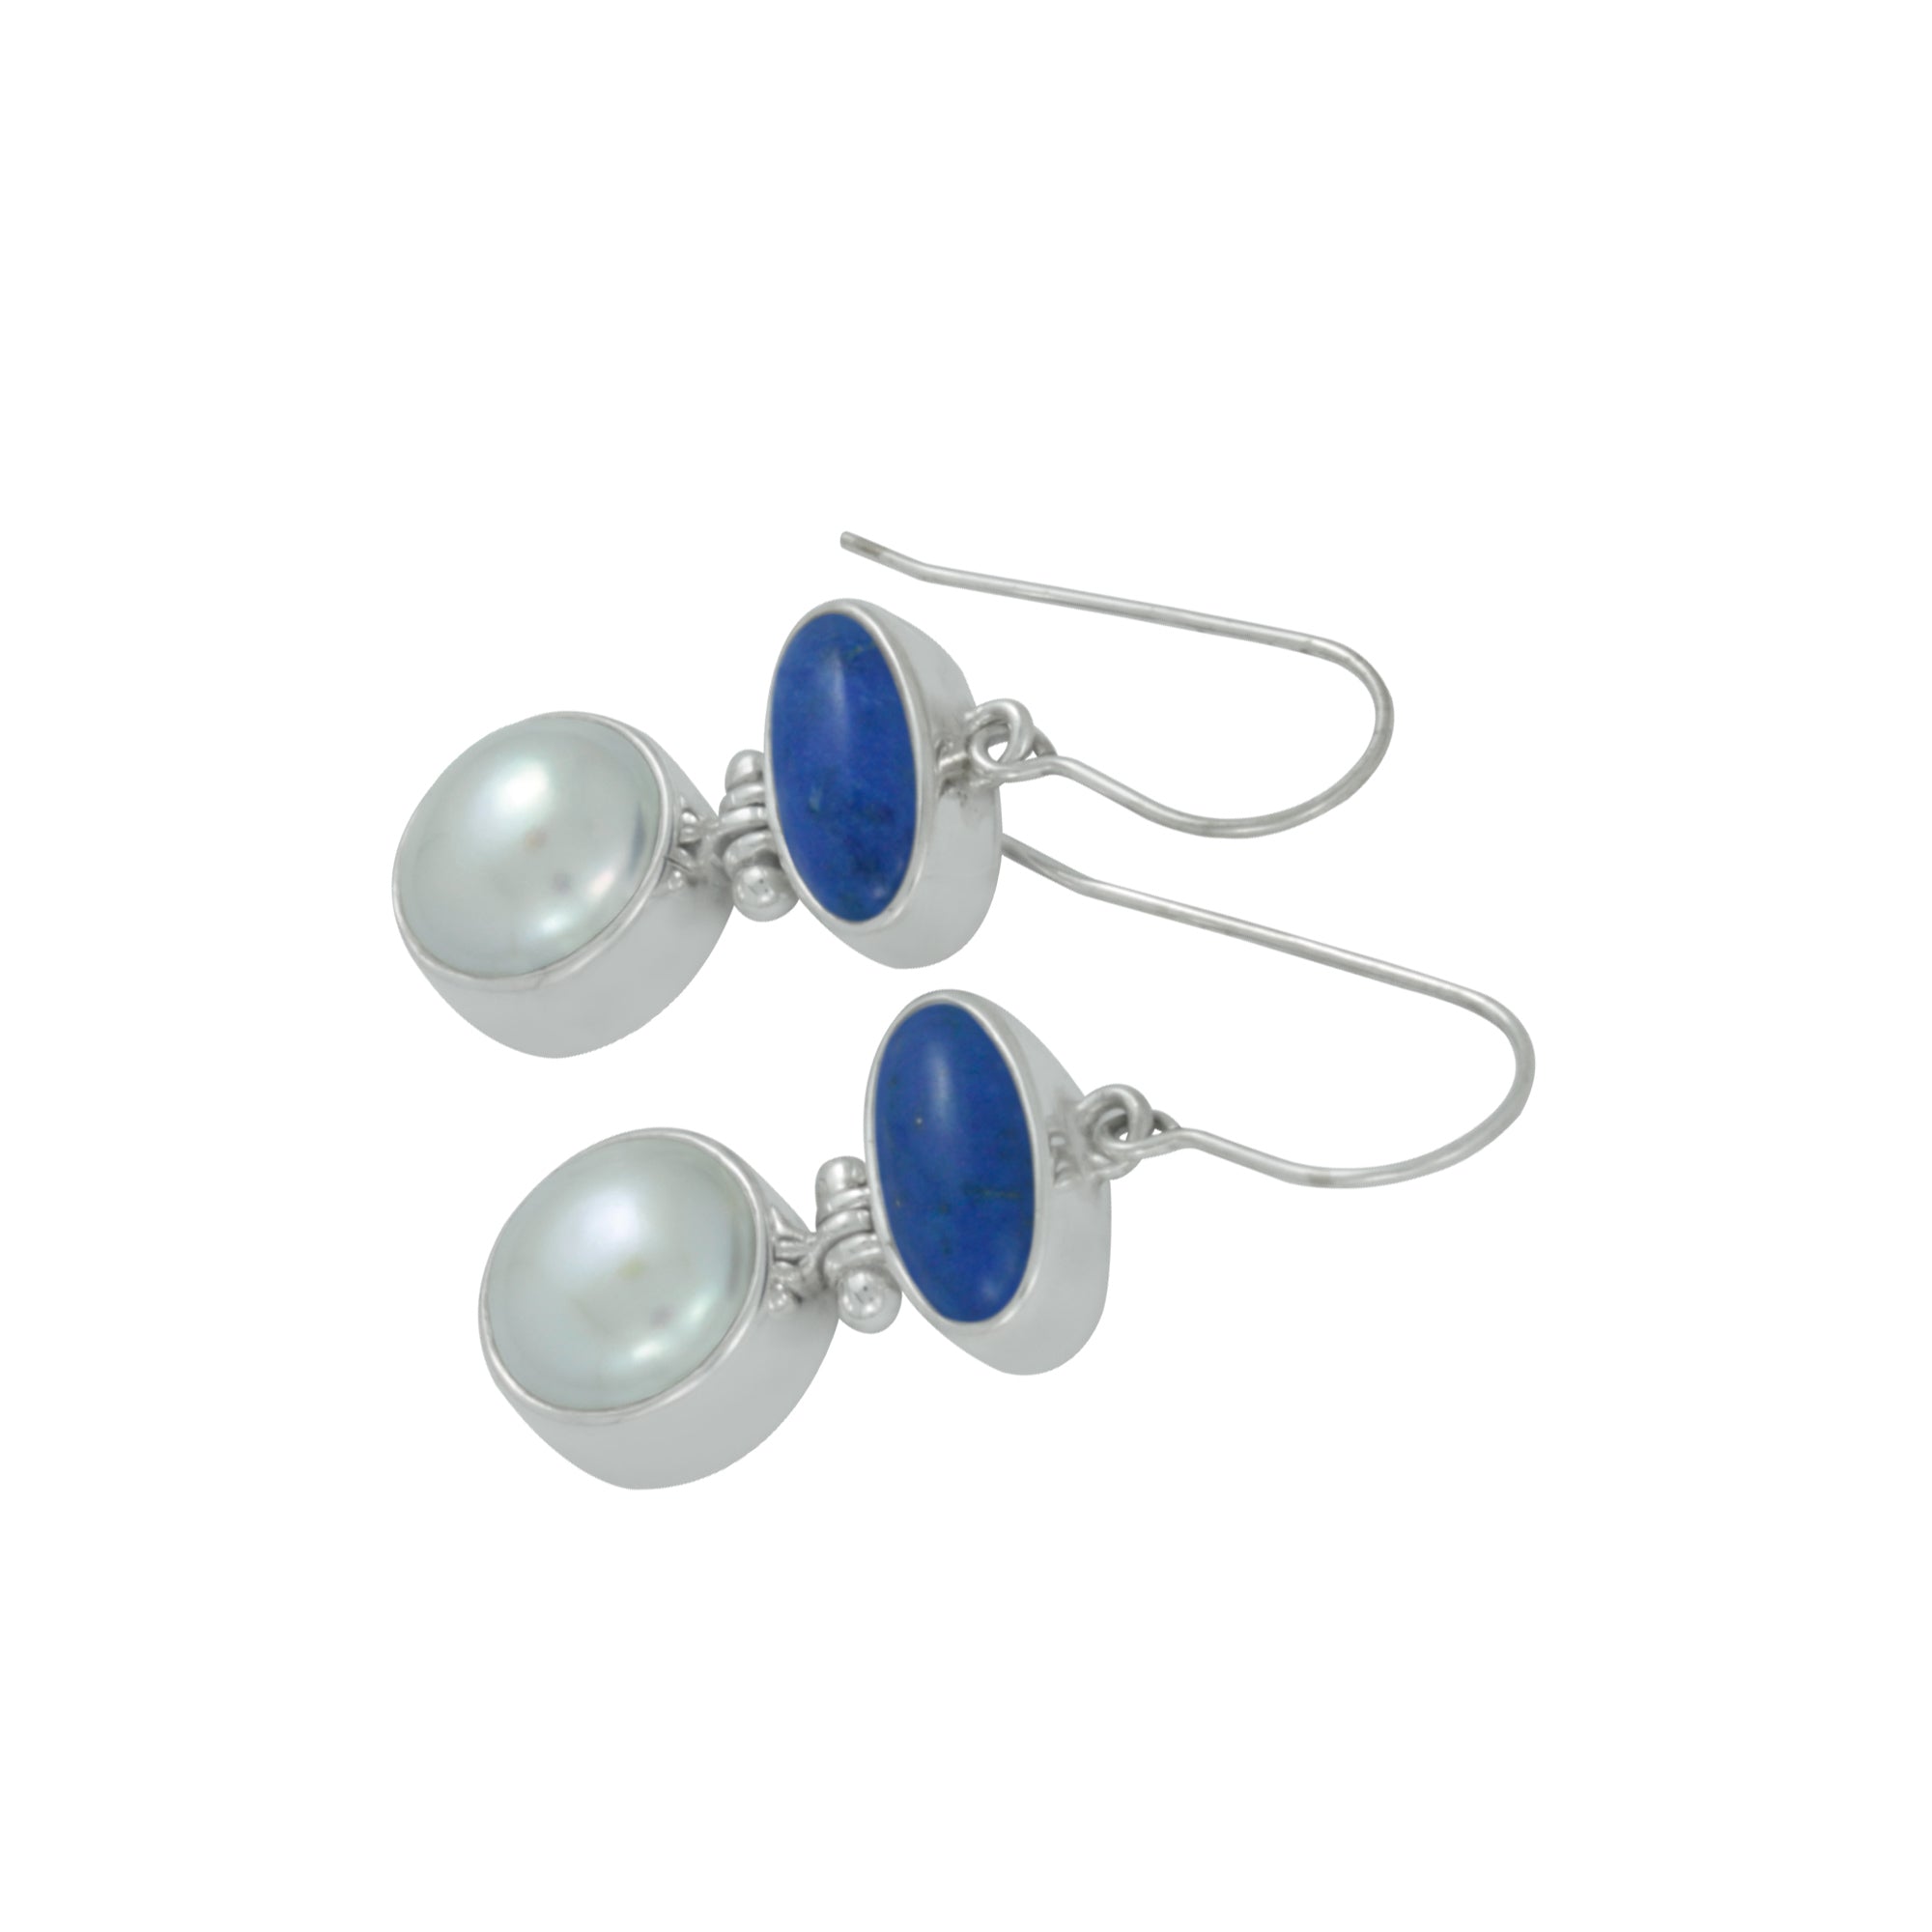 Every Day Elegance featuring Lapis and Pearl sterling silver earring